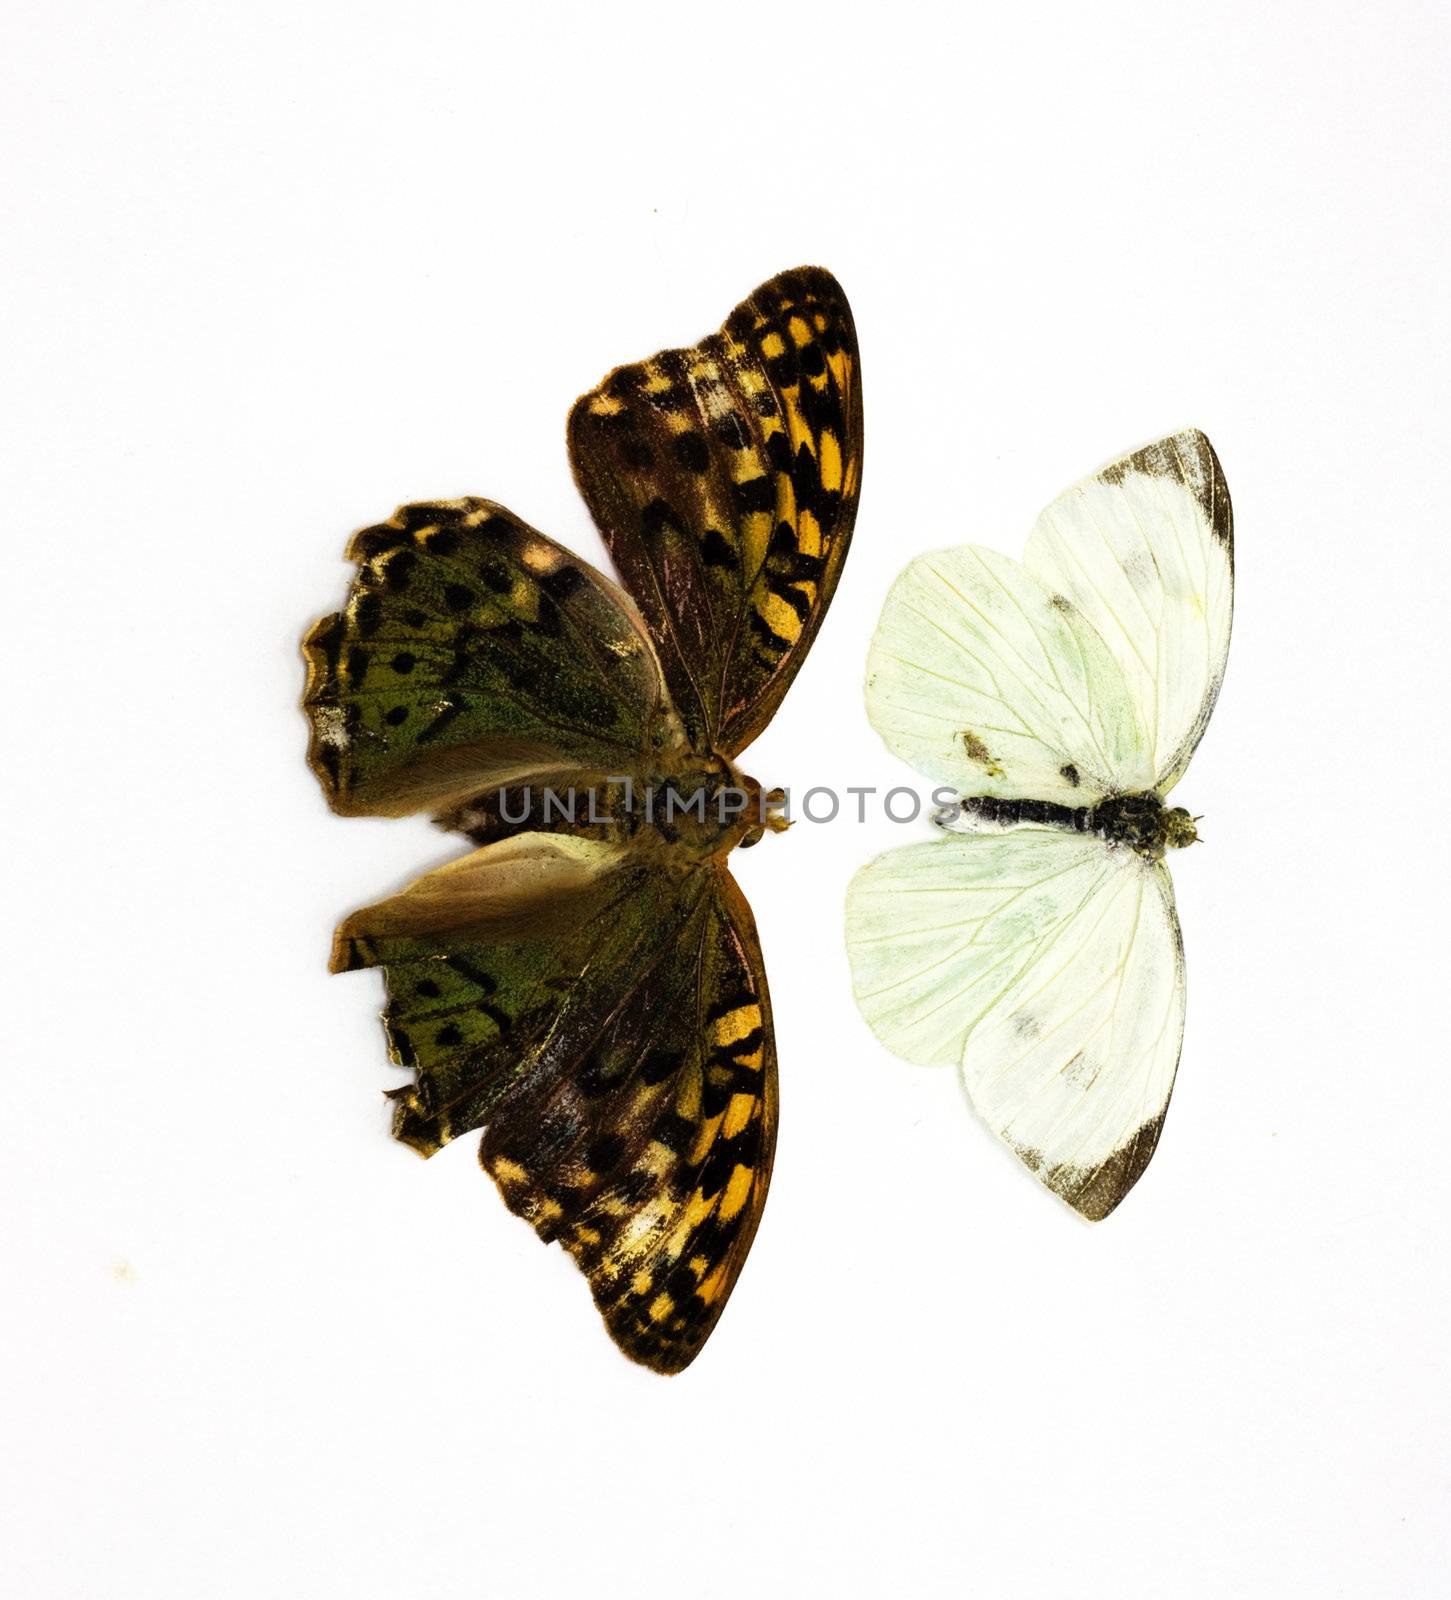 Two beautiful tropical butterflies insulated in white by schankz